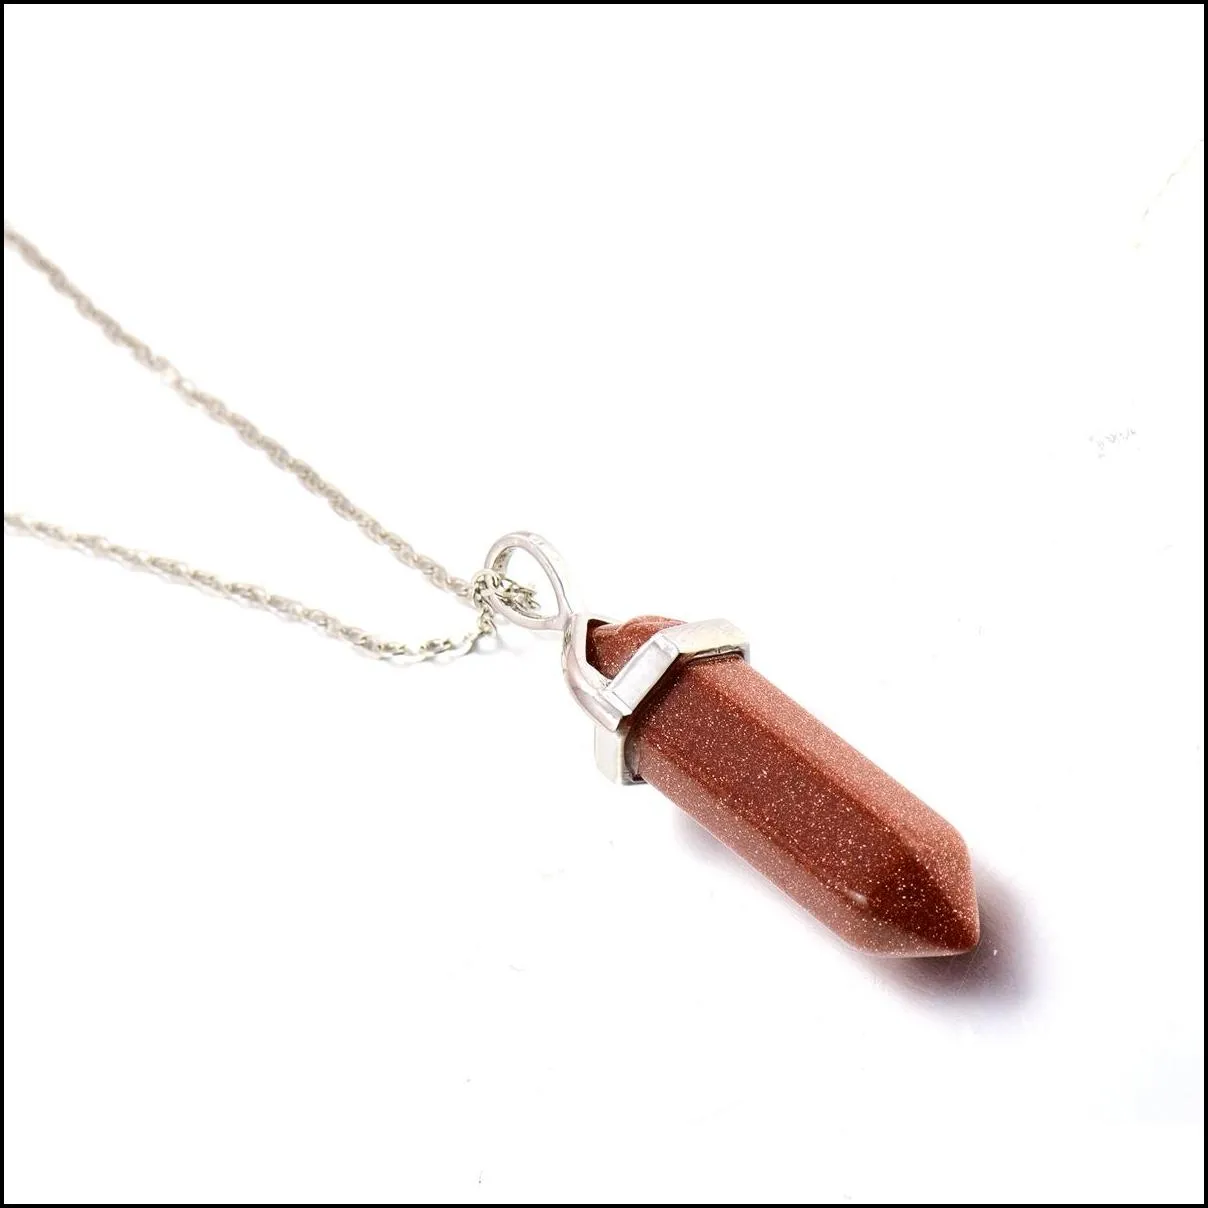 natural stone bullet shape pendant necklaces chains hexagonal prism chakra reiki crystal jewelry for women men